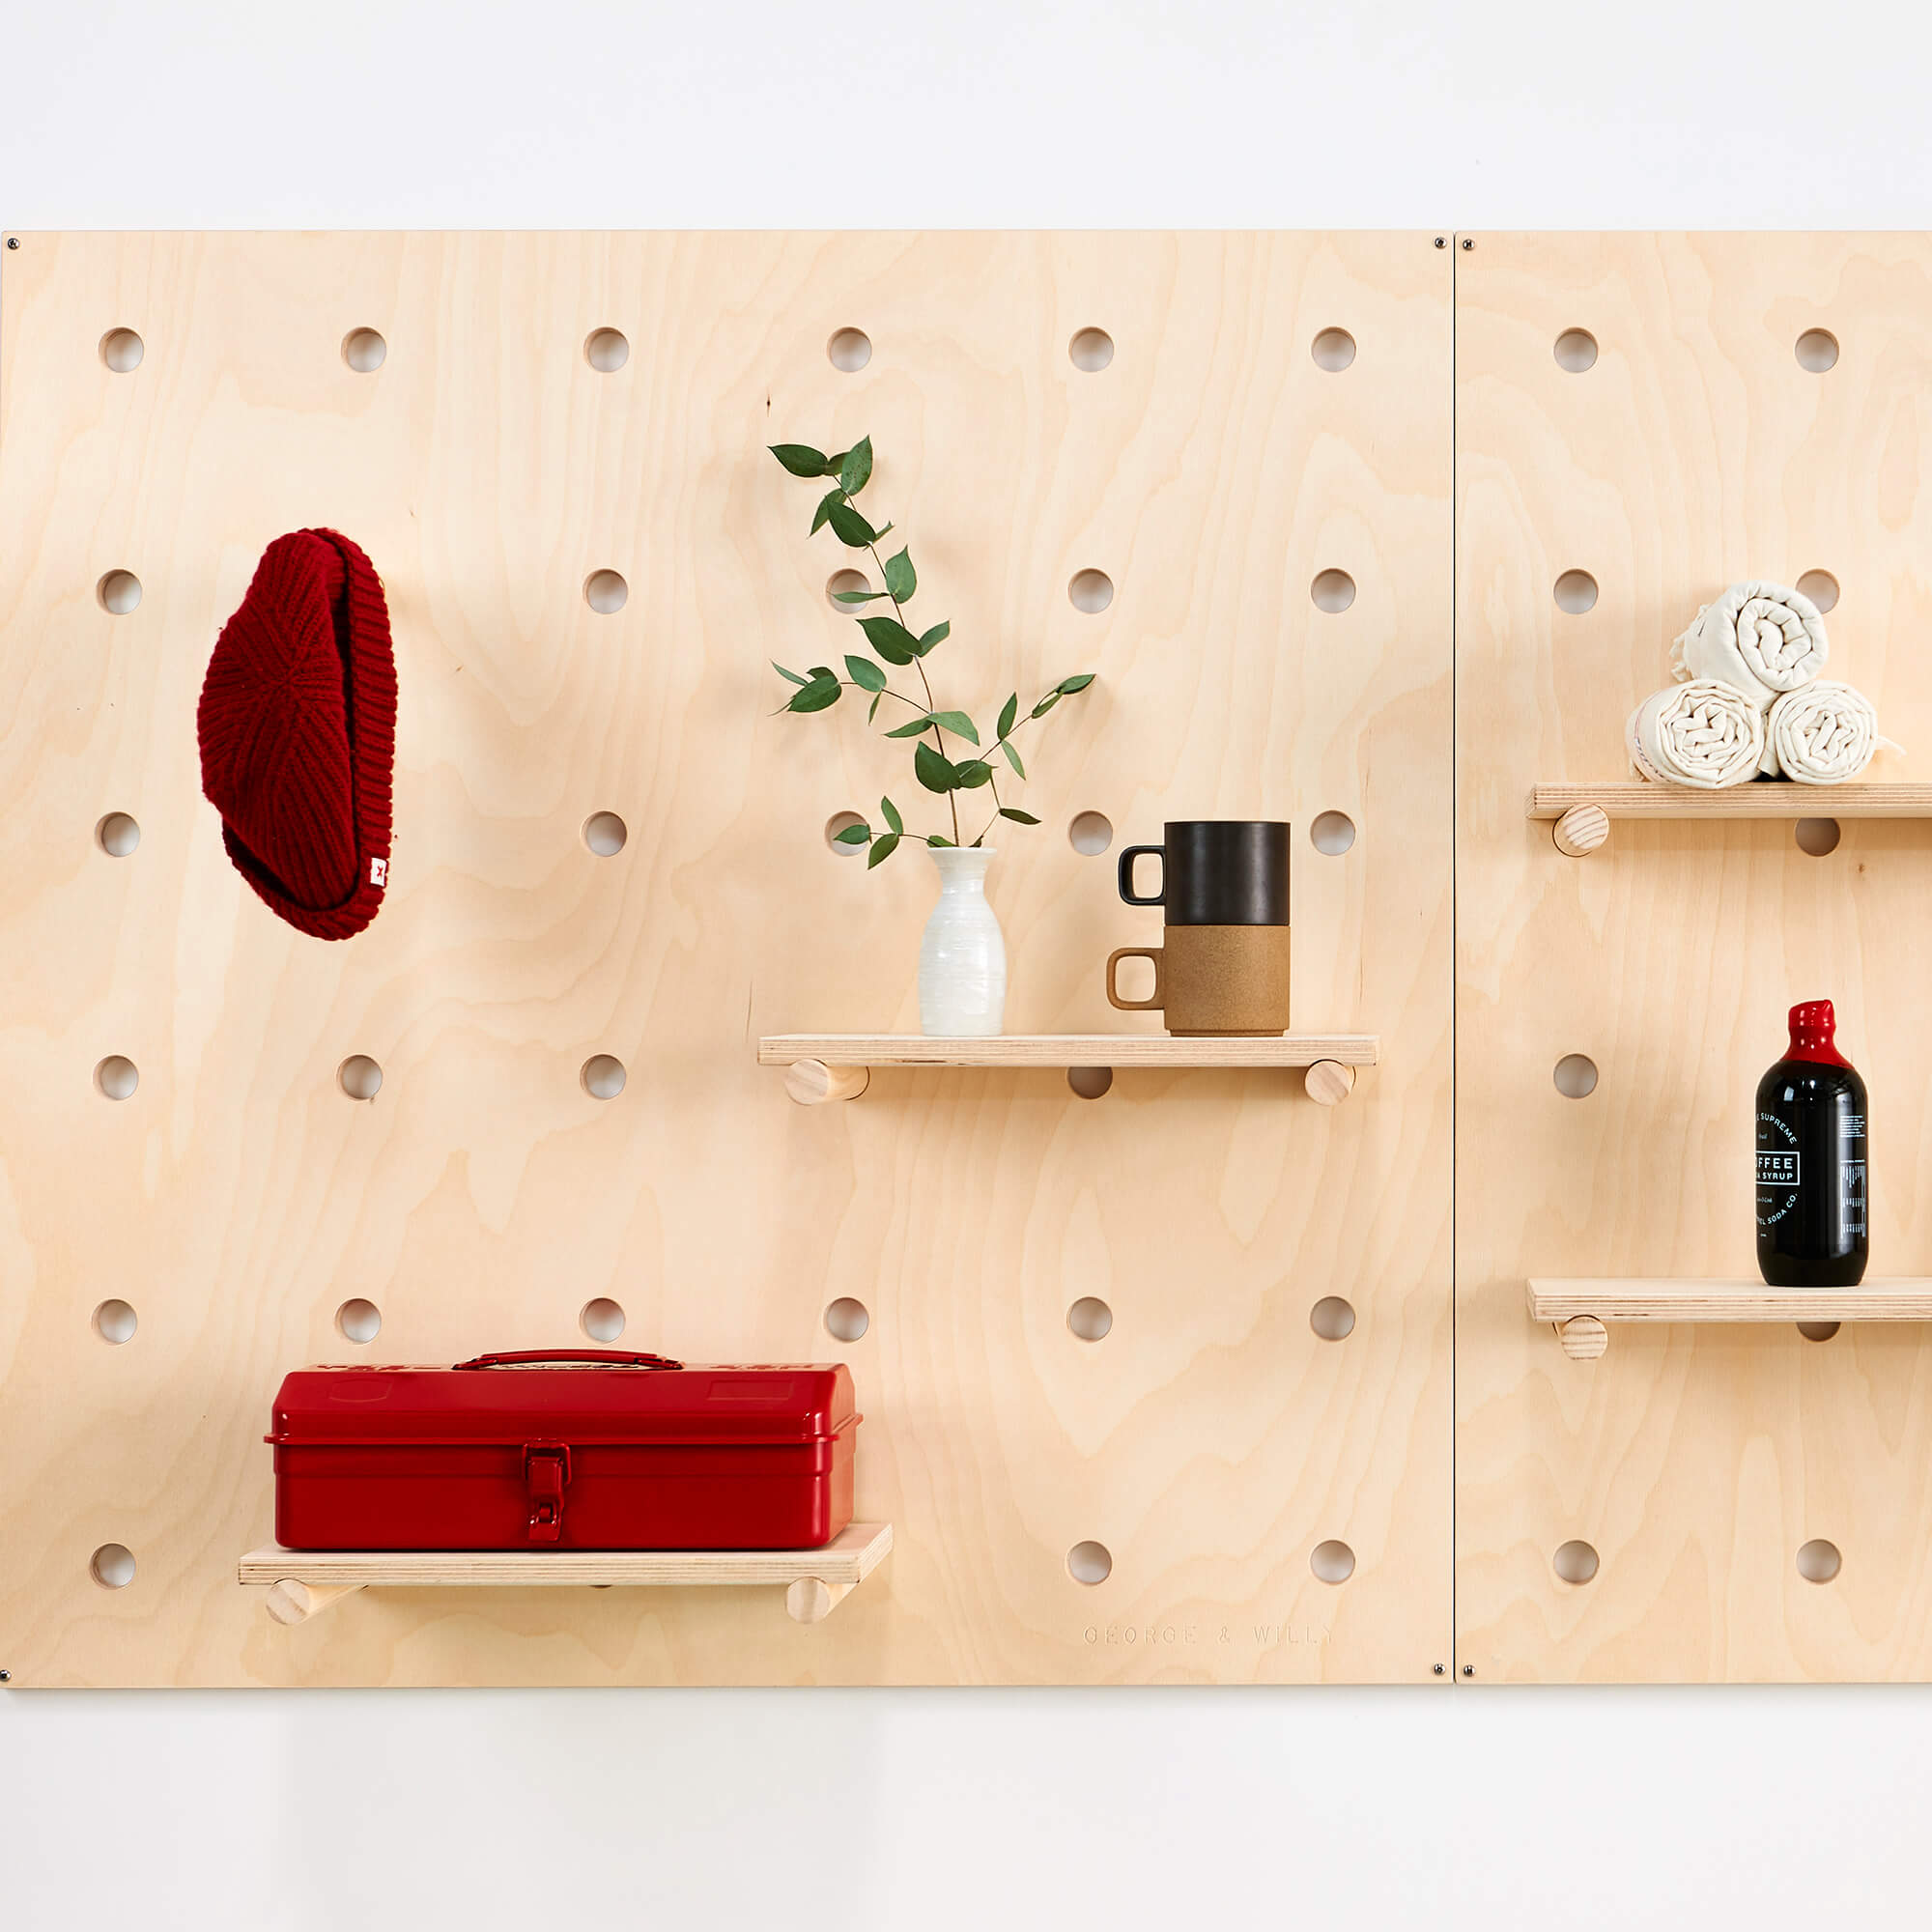 A wooden pegboard with dowel pegs and shelves designed for storing belongings or displaying products in a store